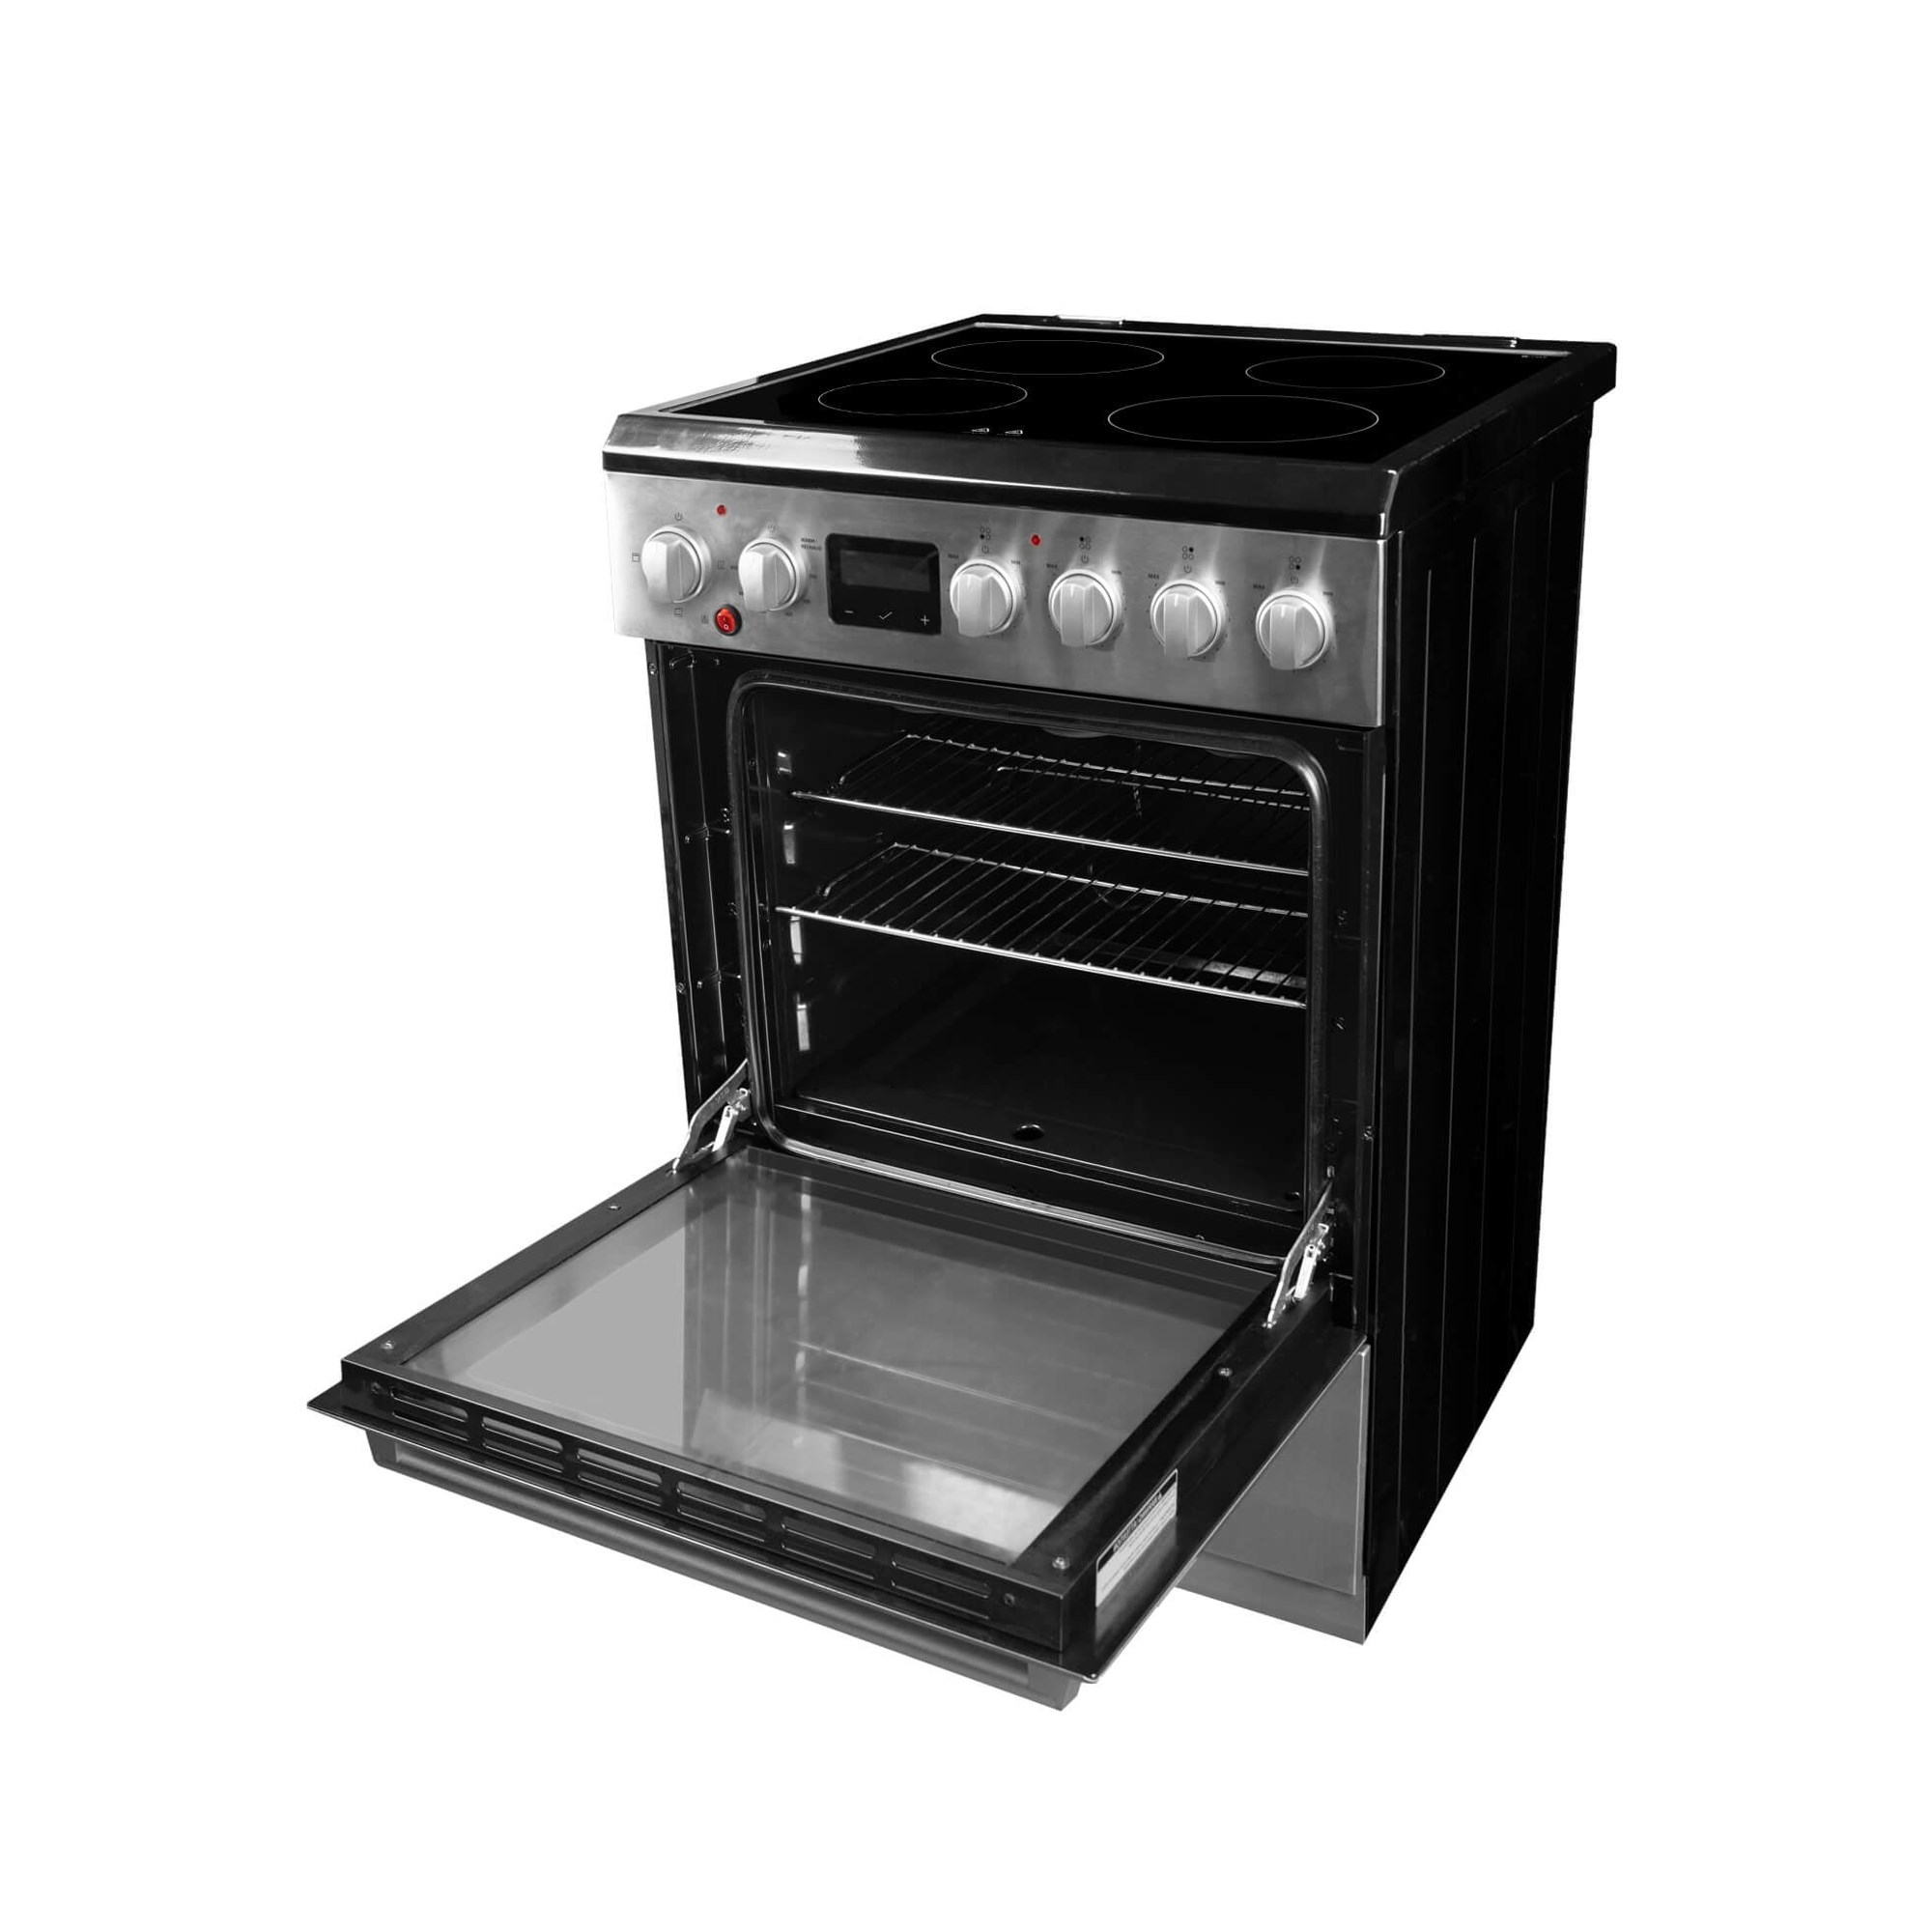  Danby Designer 20-In. Electric Range with Coil